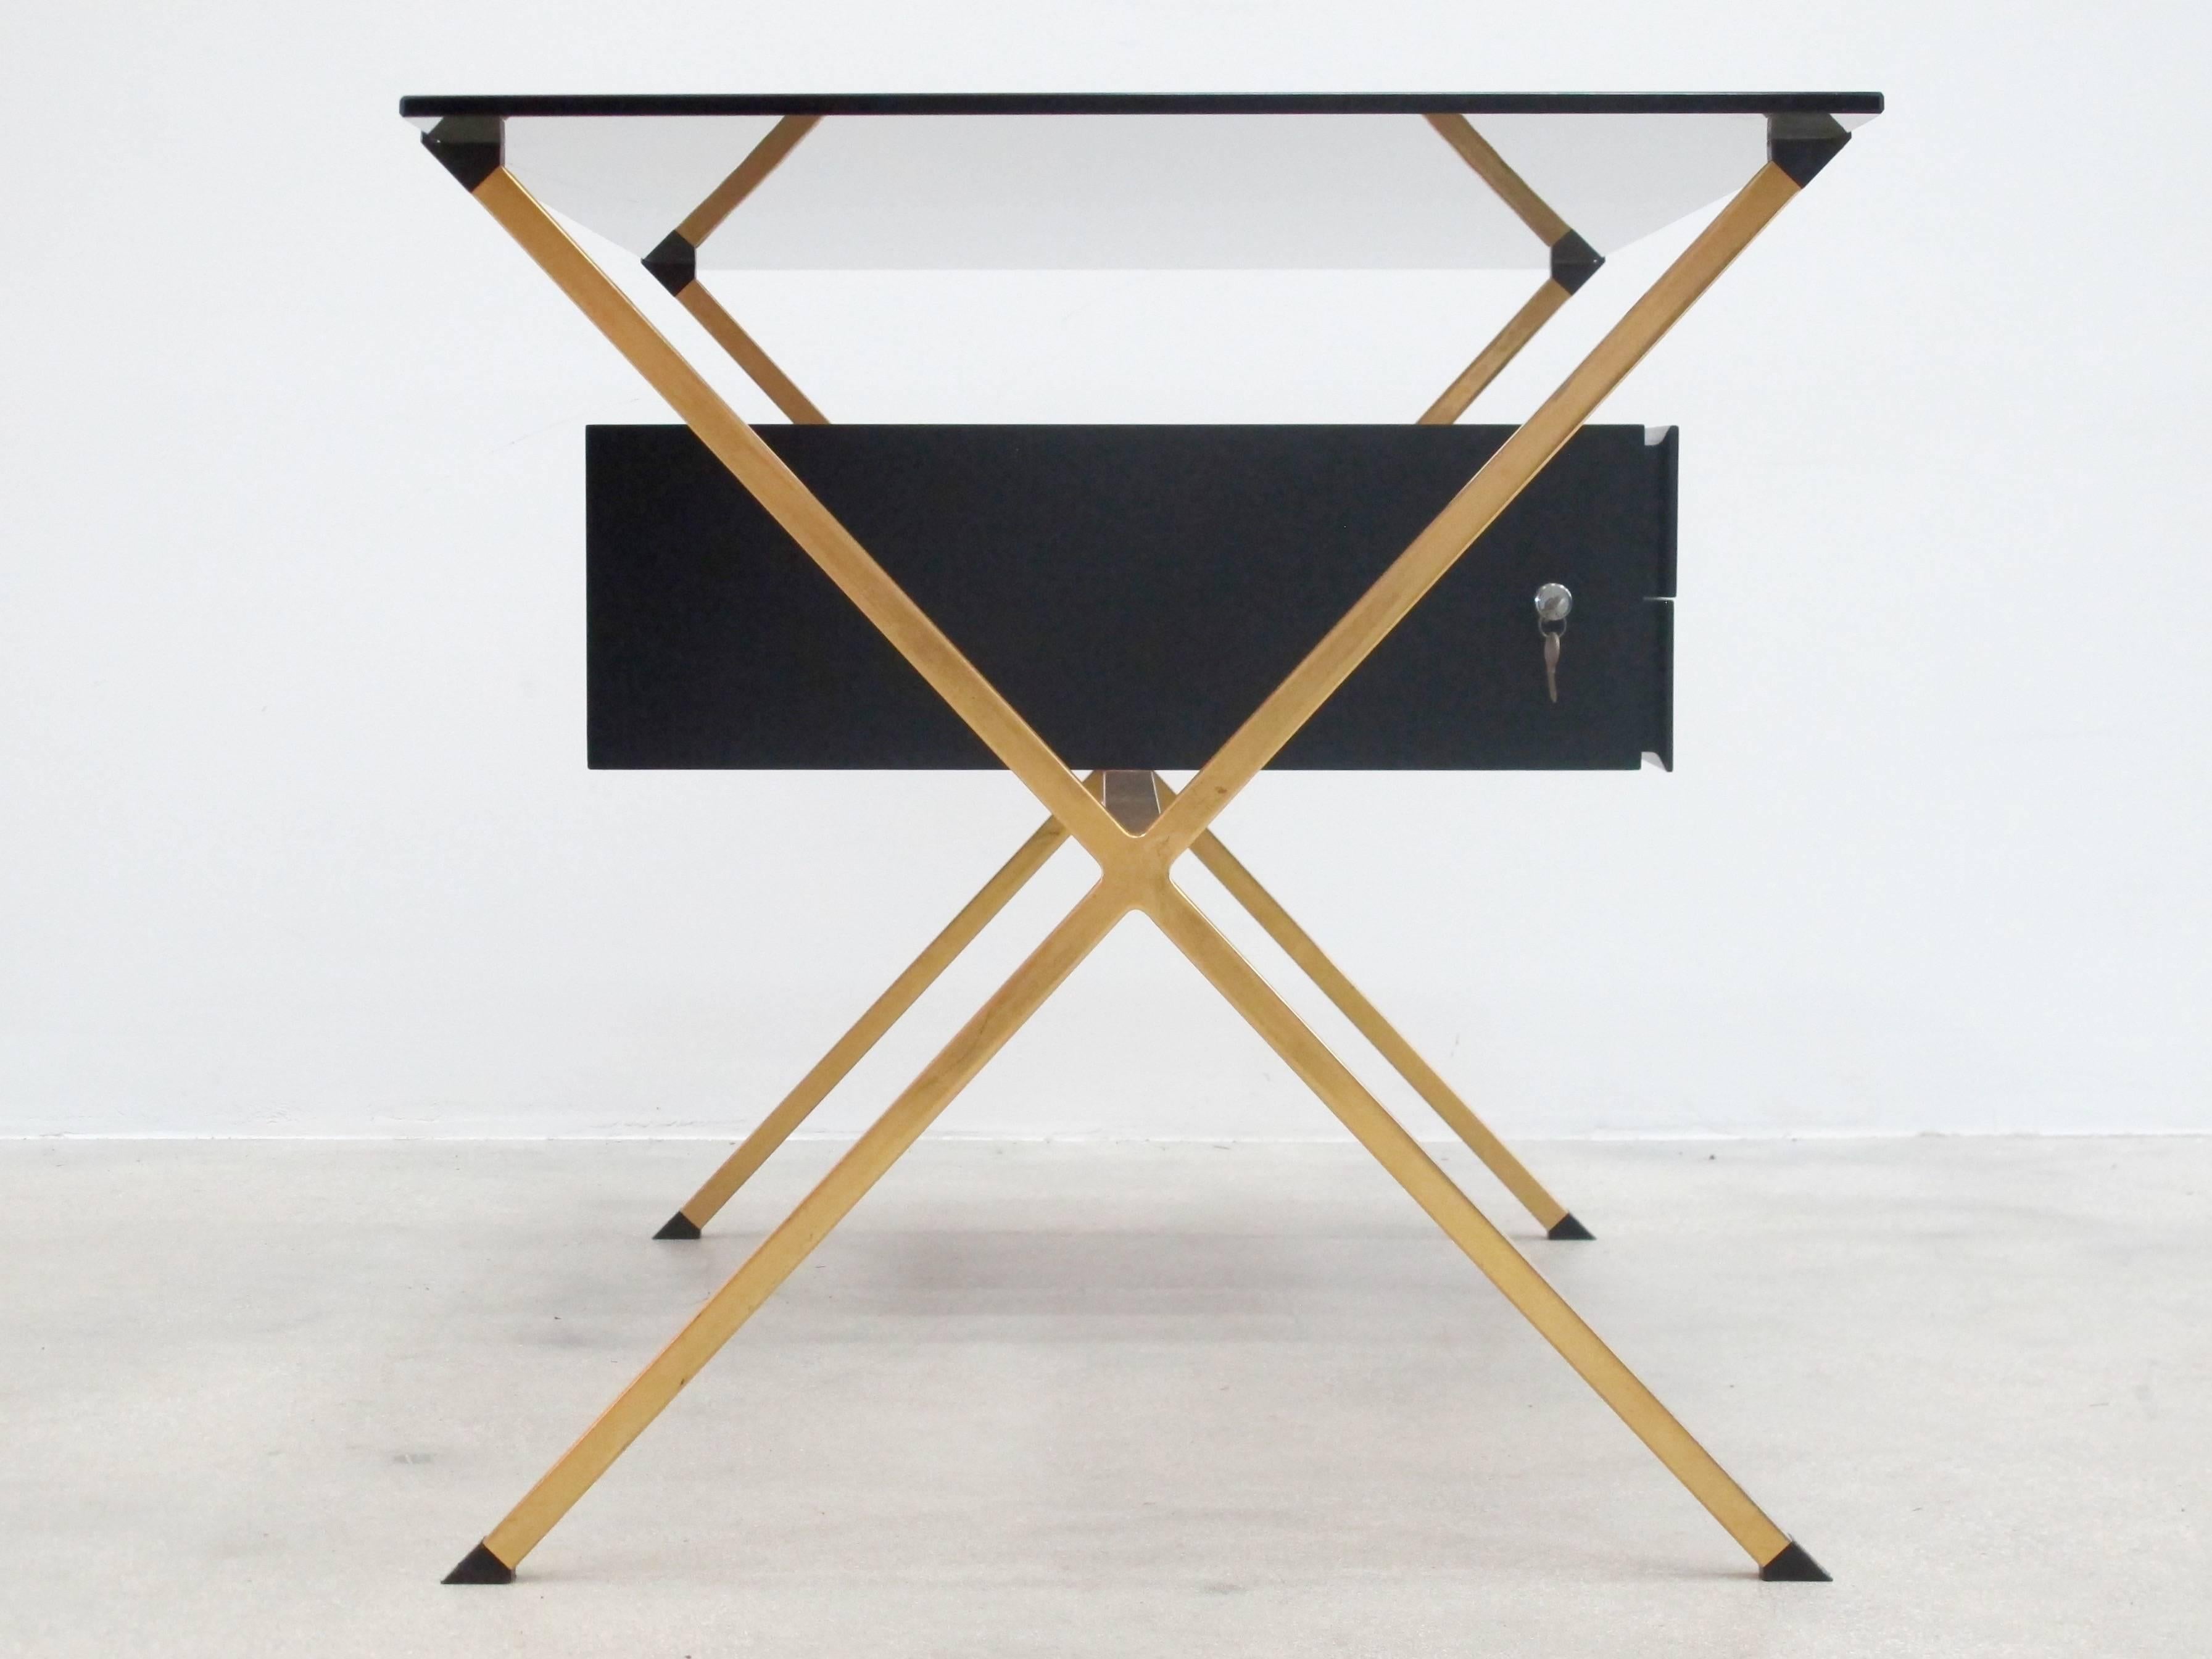 A rare Mid-Century Modern brass and smoked glass desk by the Italian designer Franco Albini for Knoll. Storage is provided beneath the glass top within an ebonized wood compartment with two locking drawers.